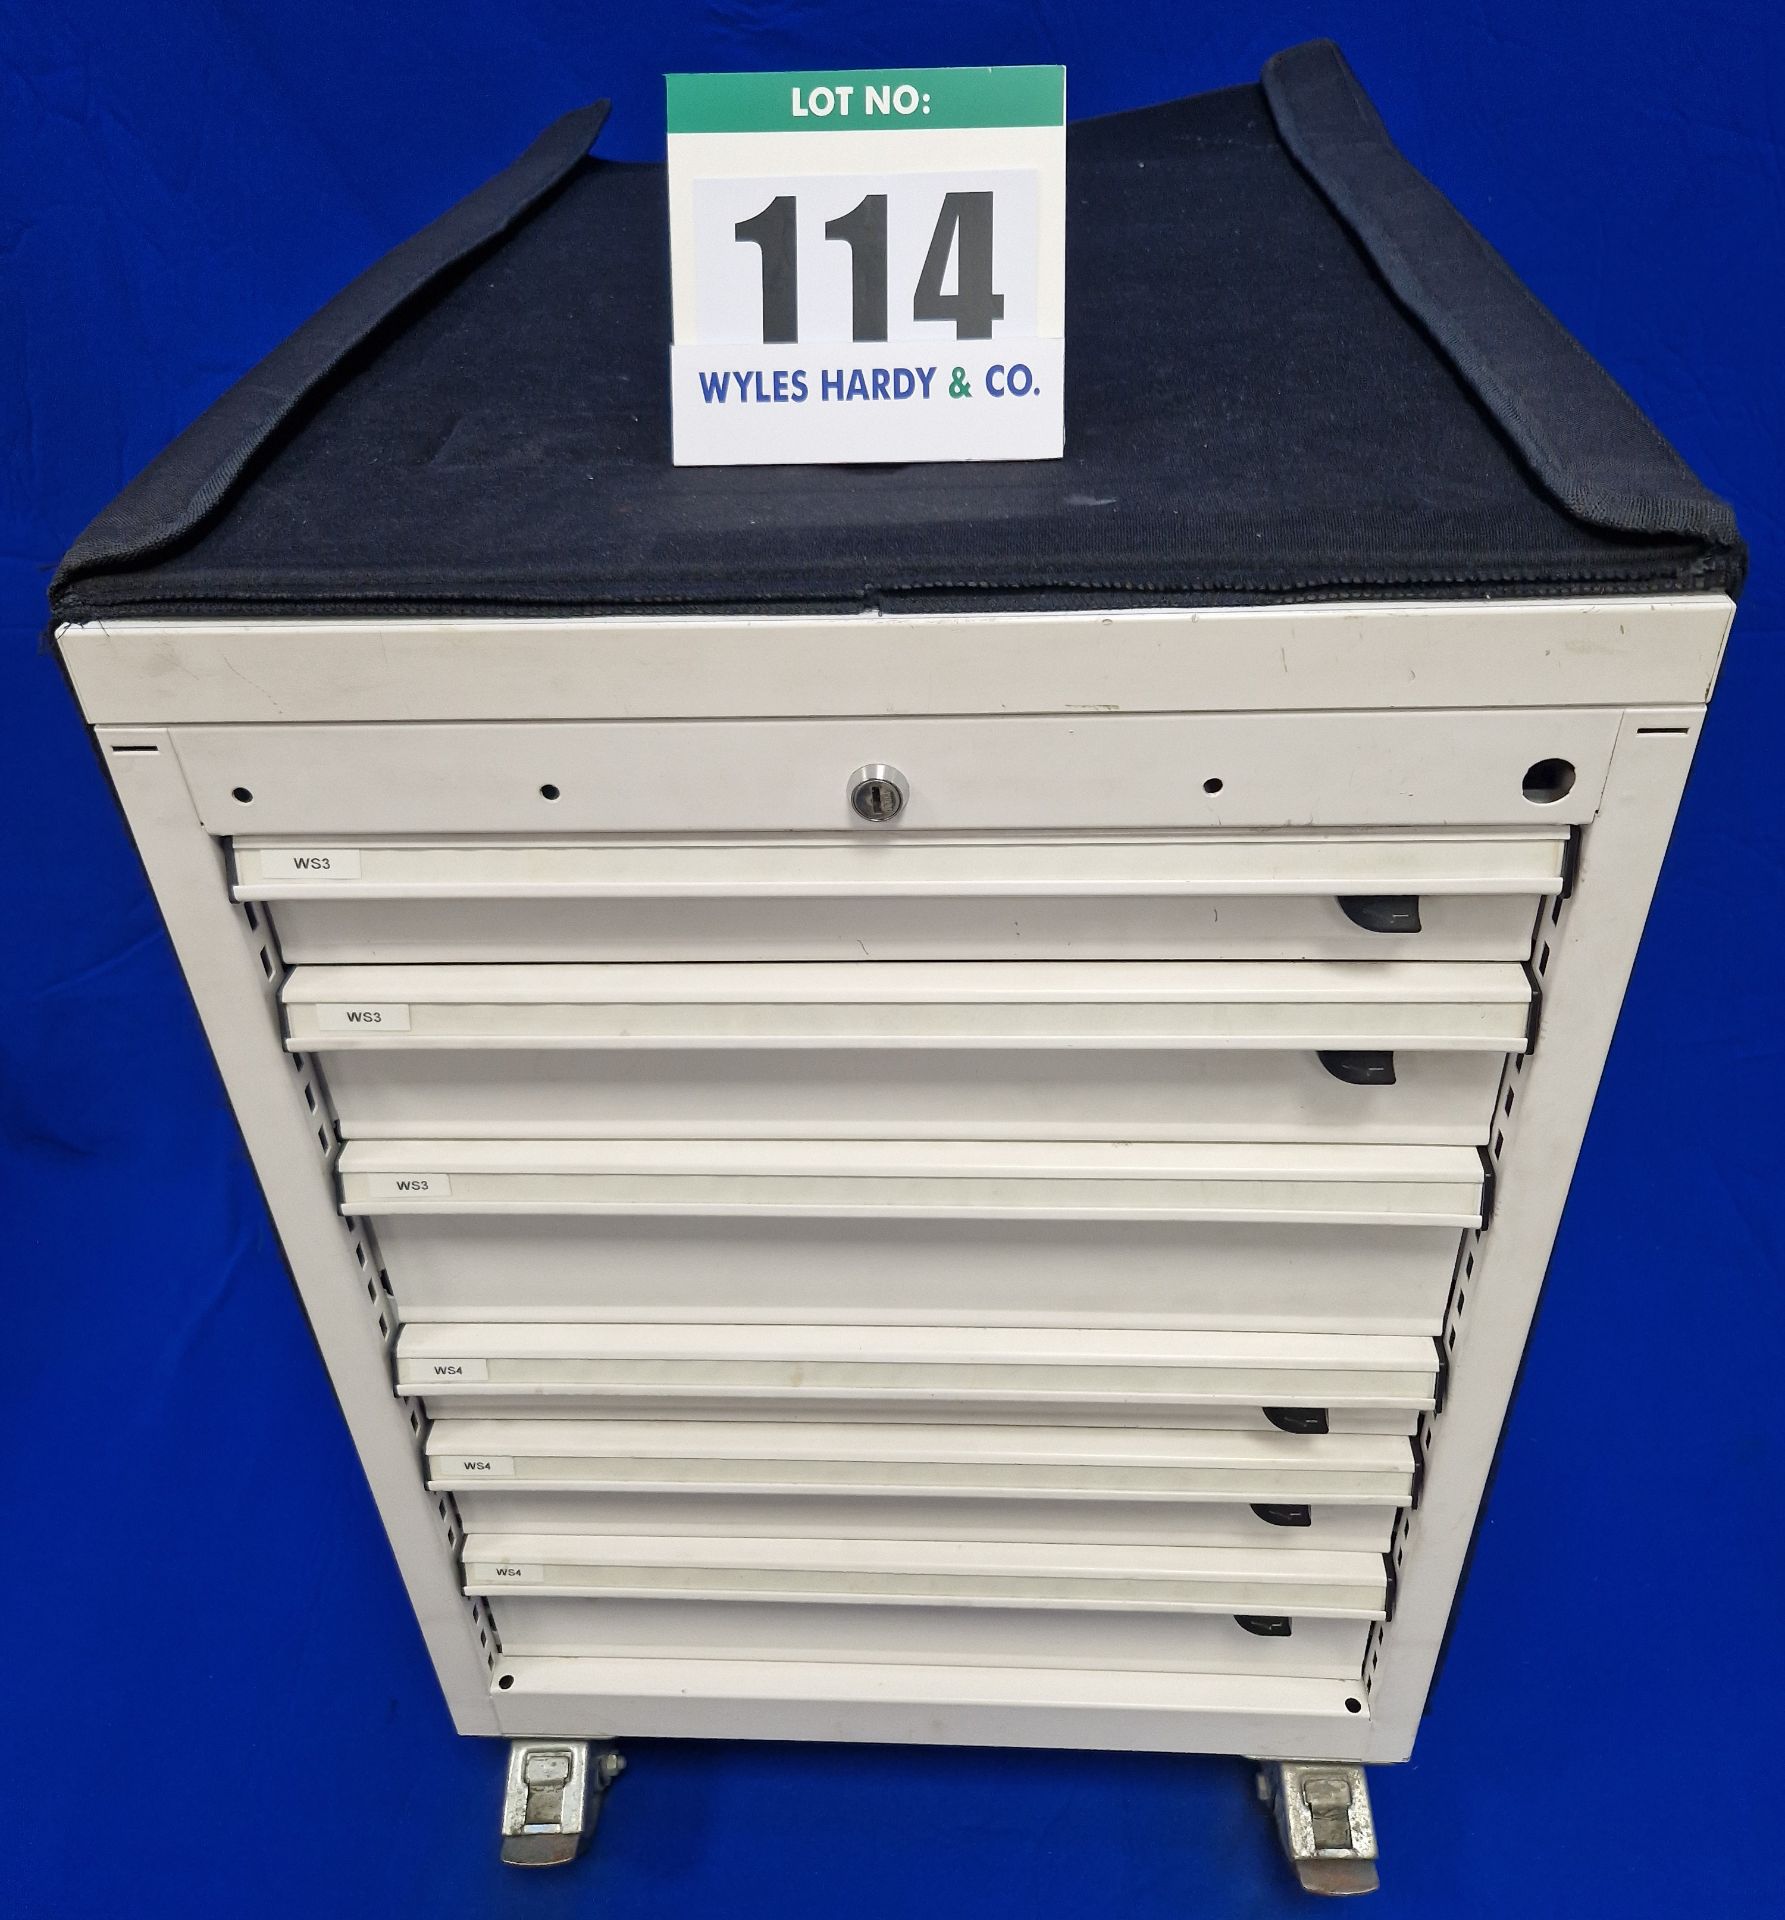 One FAMI 6-Drawer Steel Castor mounted Mechanics Tool Chest with Tailored Soft Transportation